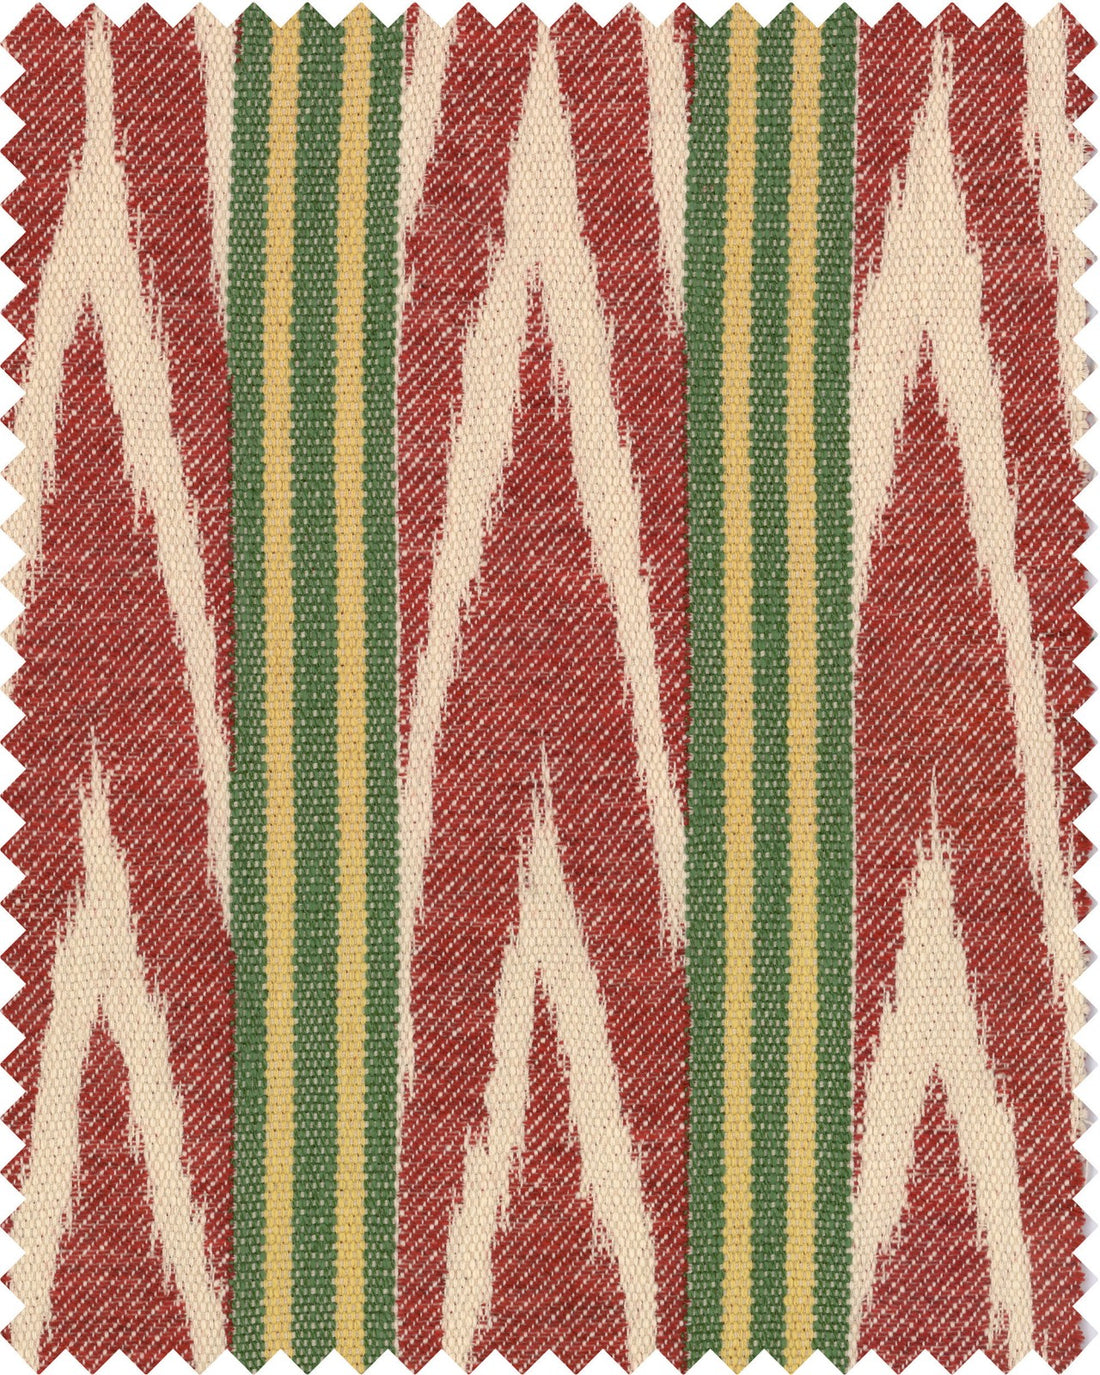 Bakhmal Ikat fabric in red green yellow taupe color - pattern number FB00082 - by Mind The Gap in the Woodstock collection